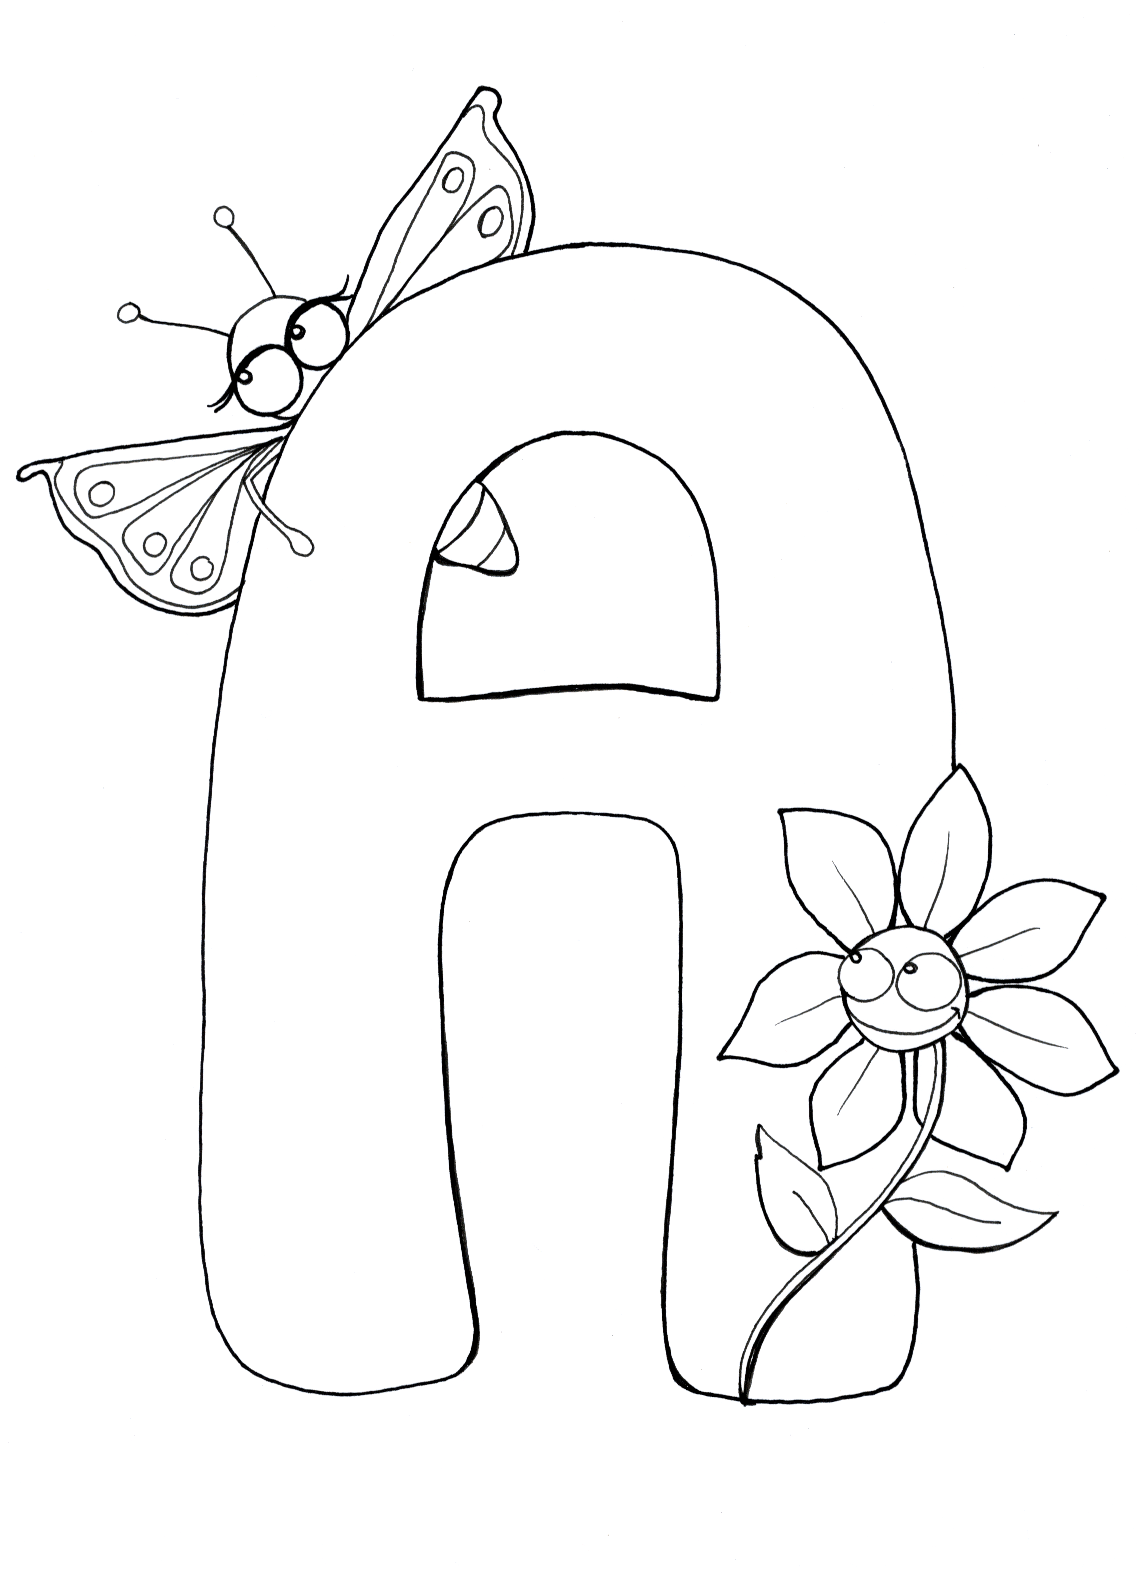 childrens interactive coloring pages - photo #18